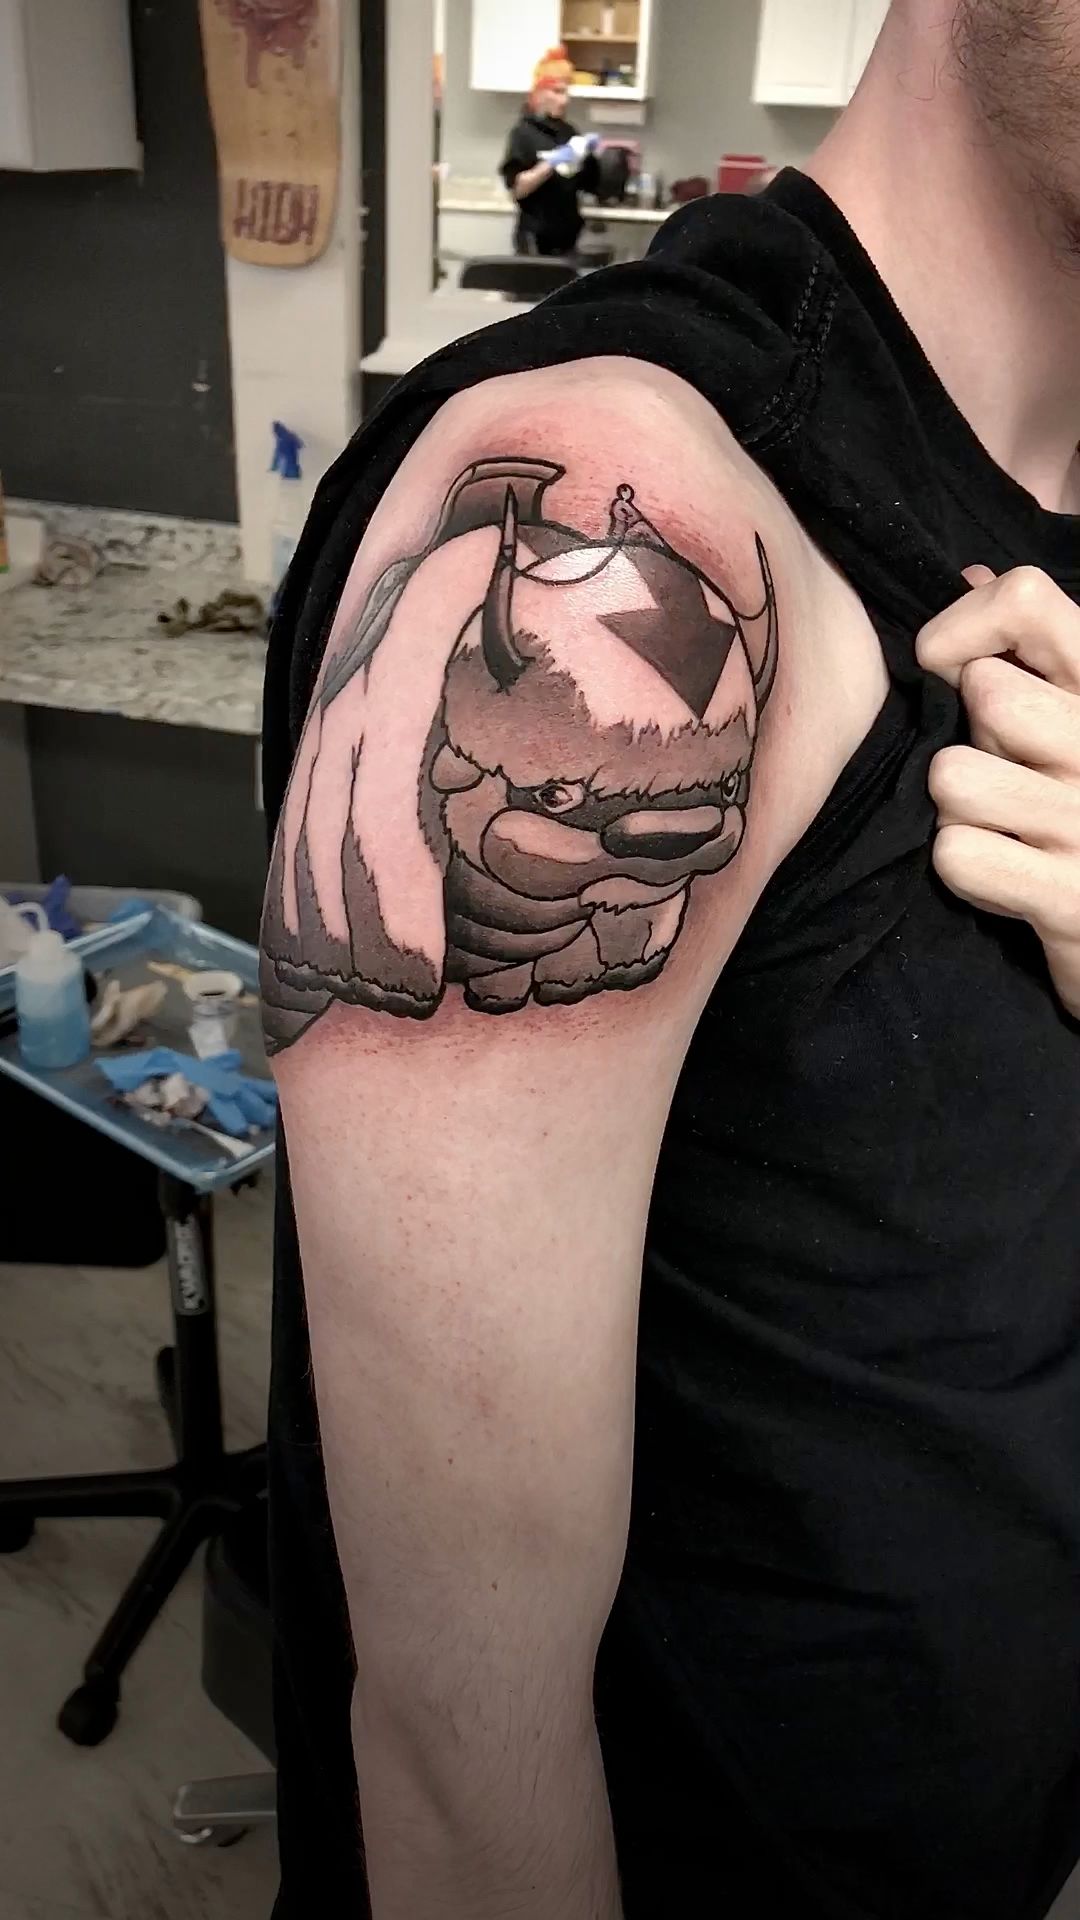 Golden Ink Tattoo  Little Appa with a tiny Momo from Avatar the Last  Airbender done last night by Denise for Casey Thank you so much for coming  through It was a